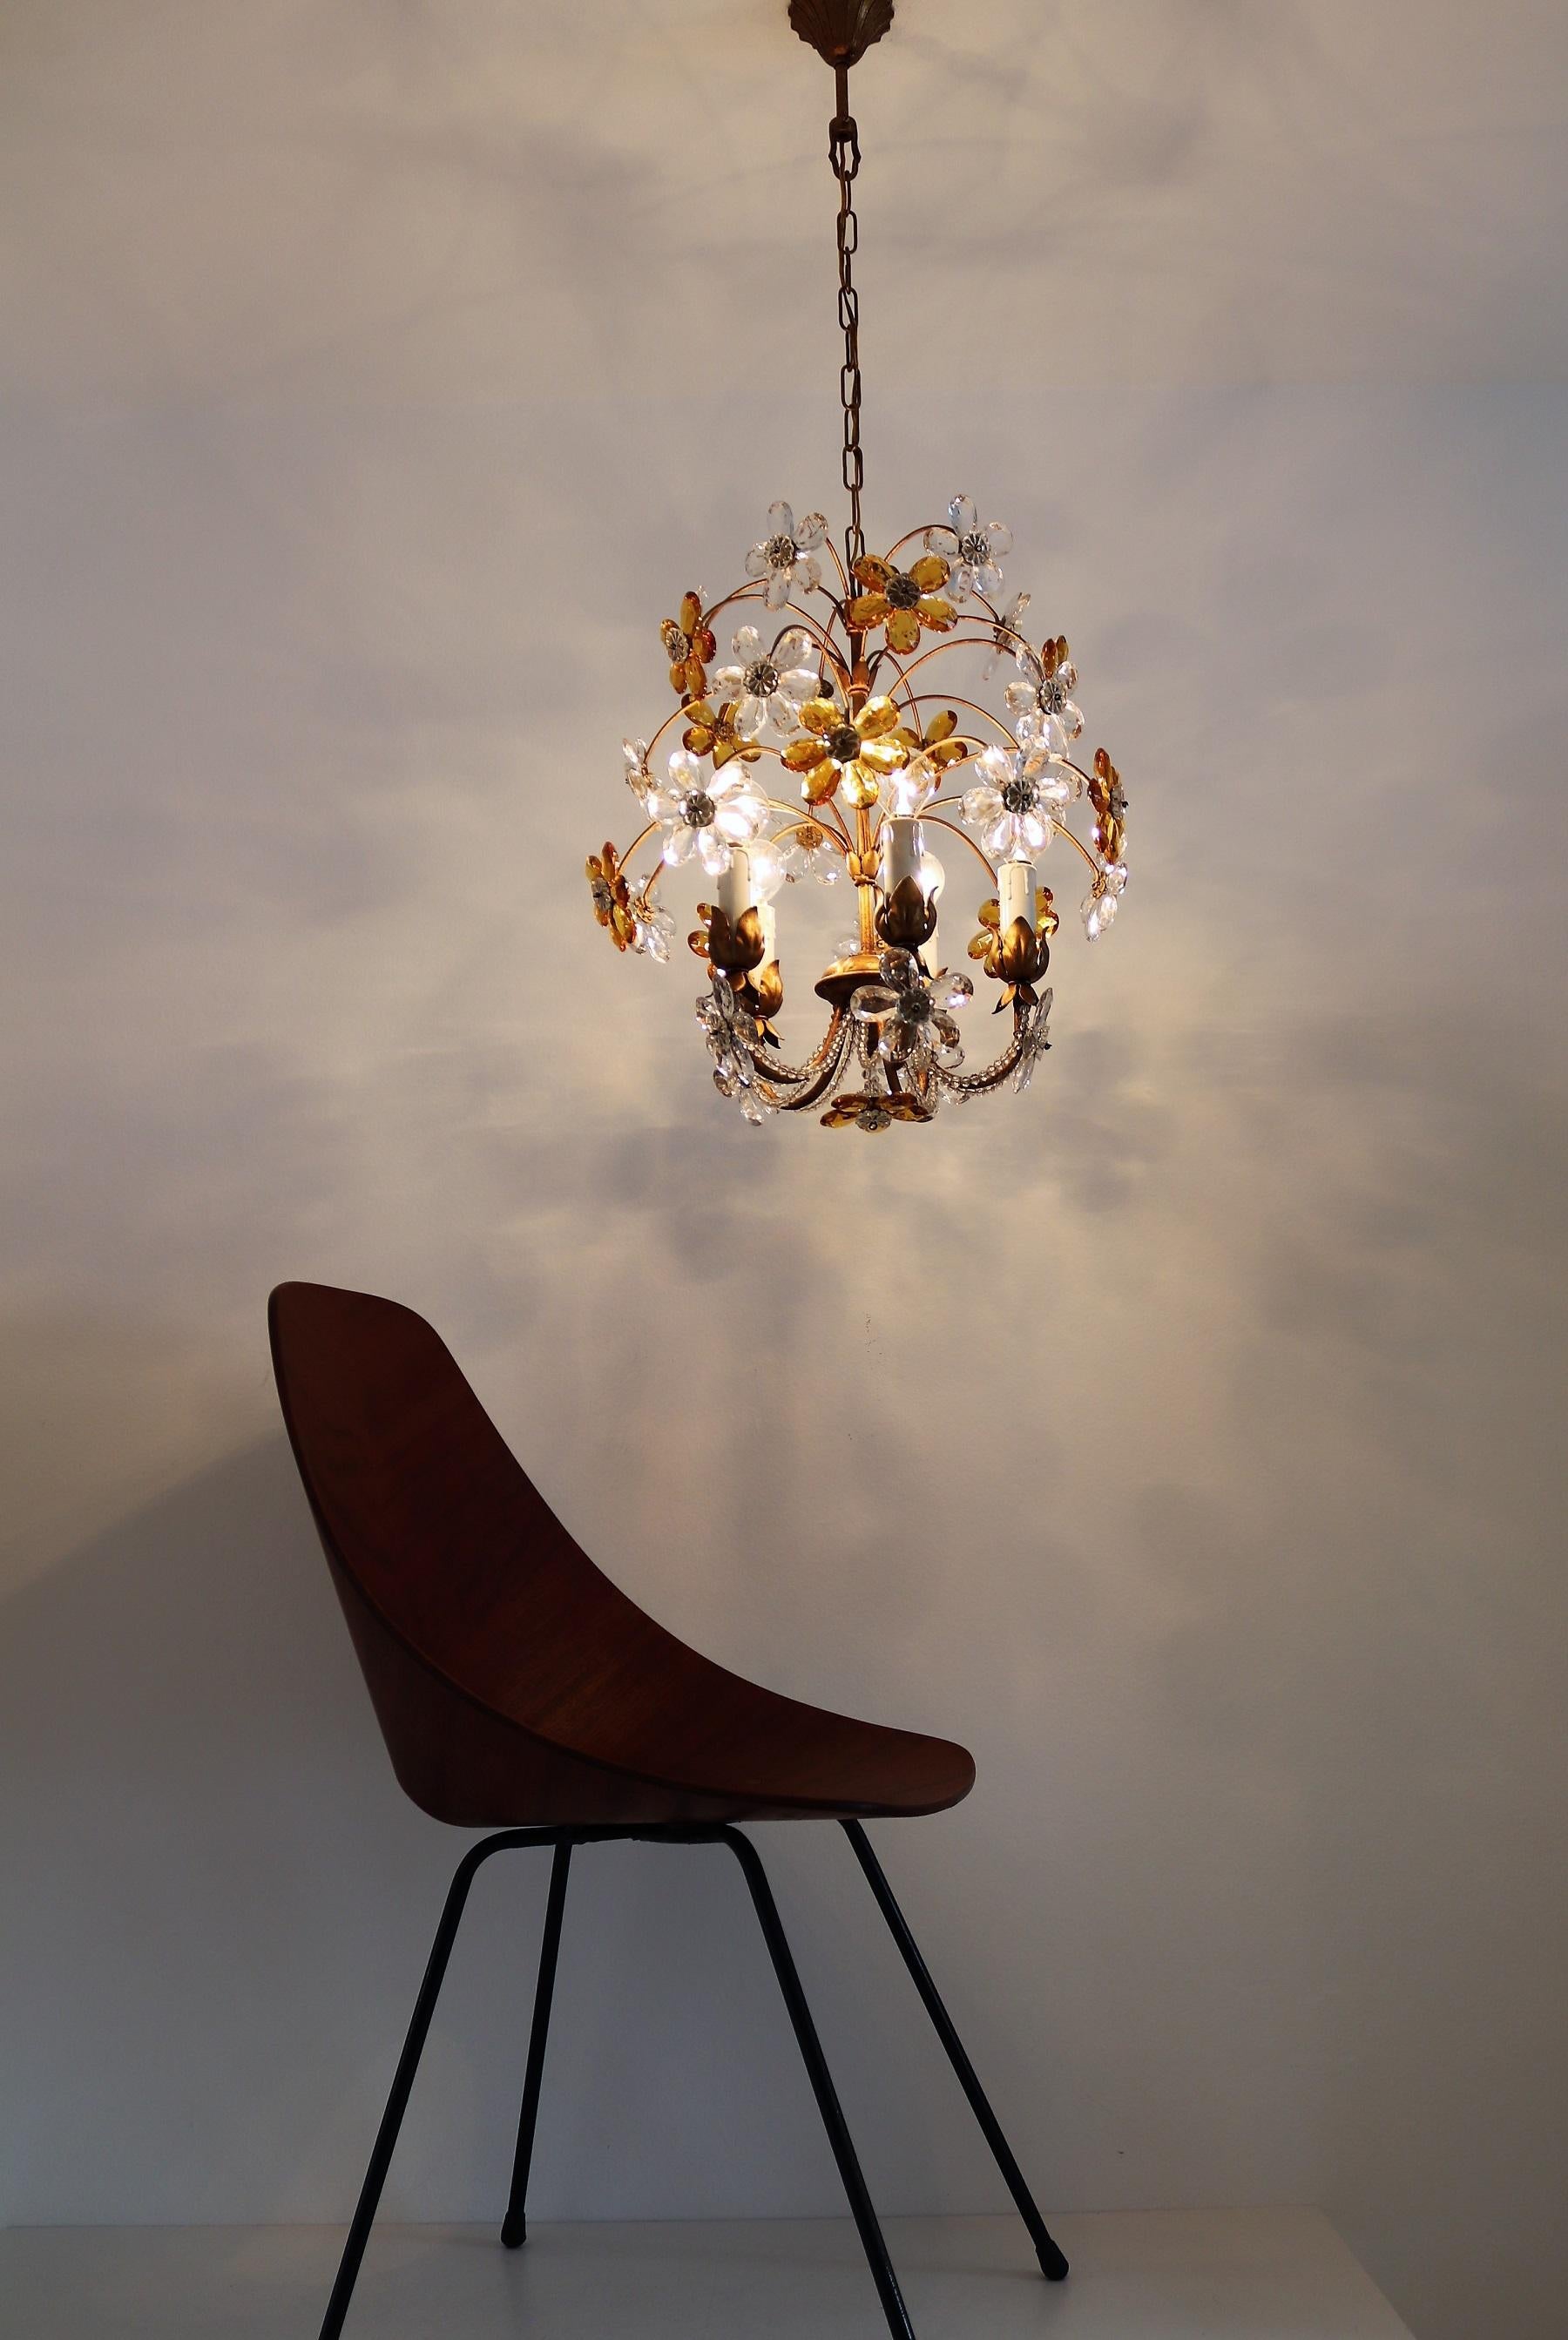 Beautiful chandelier Made in Italy in the 1950s with transparent and yellow Murano drops, which represents a cascade of flowers.
Studded with pearl chains.
The chandelier has 5 sockets for E14 light bulbs each 40W max.
It is in a very good vintage